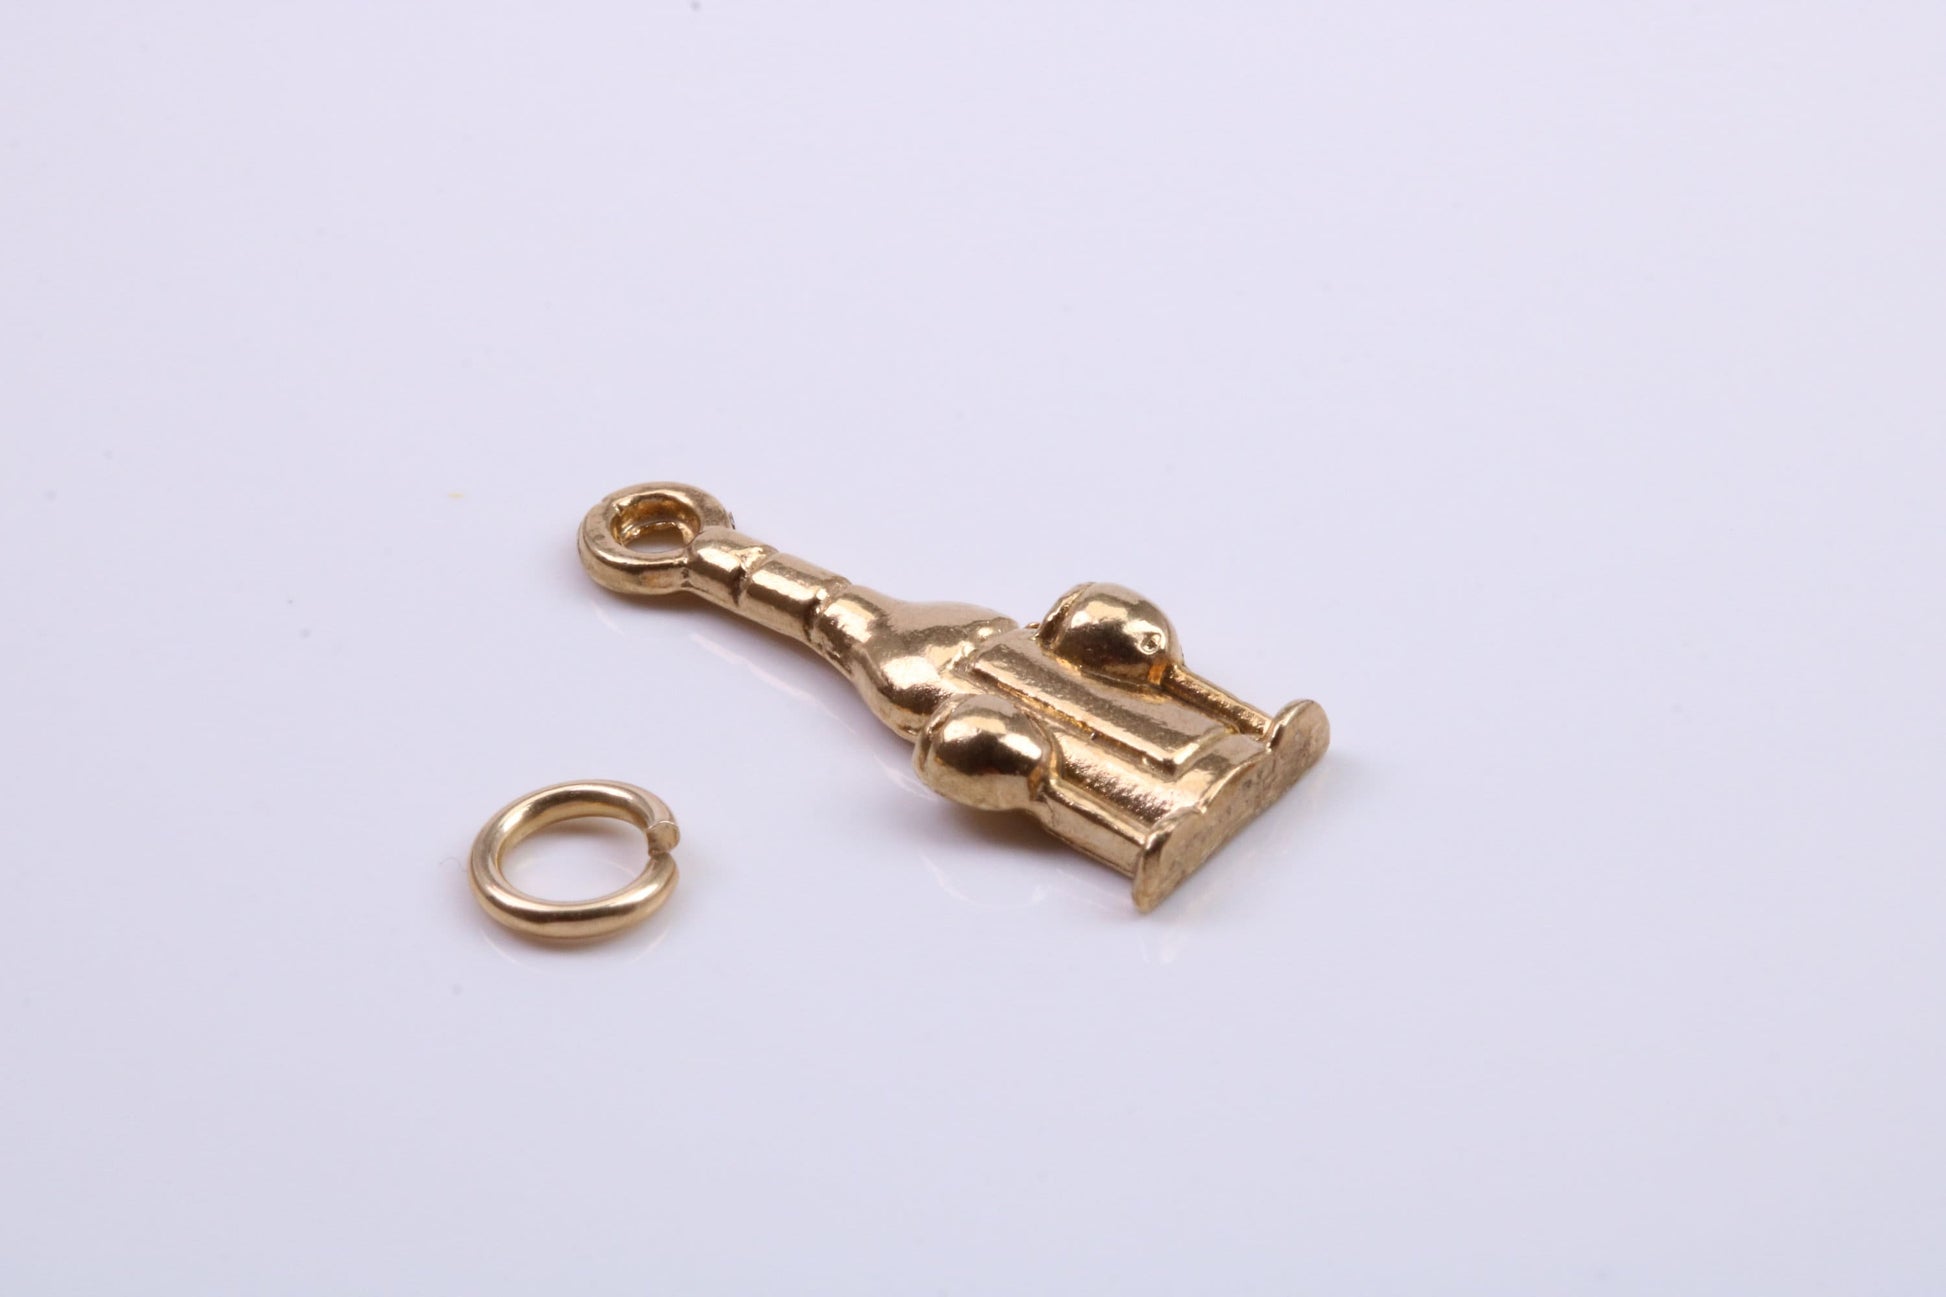 Wine Bottle and Glasses Charm, Traditional Charm, Made from Solid 9ct Yellow Gold, British Hallmarked, Complete with Attachment Link